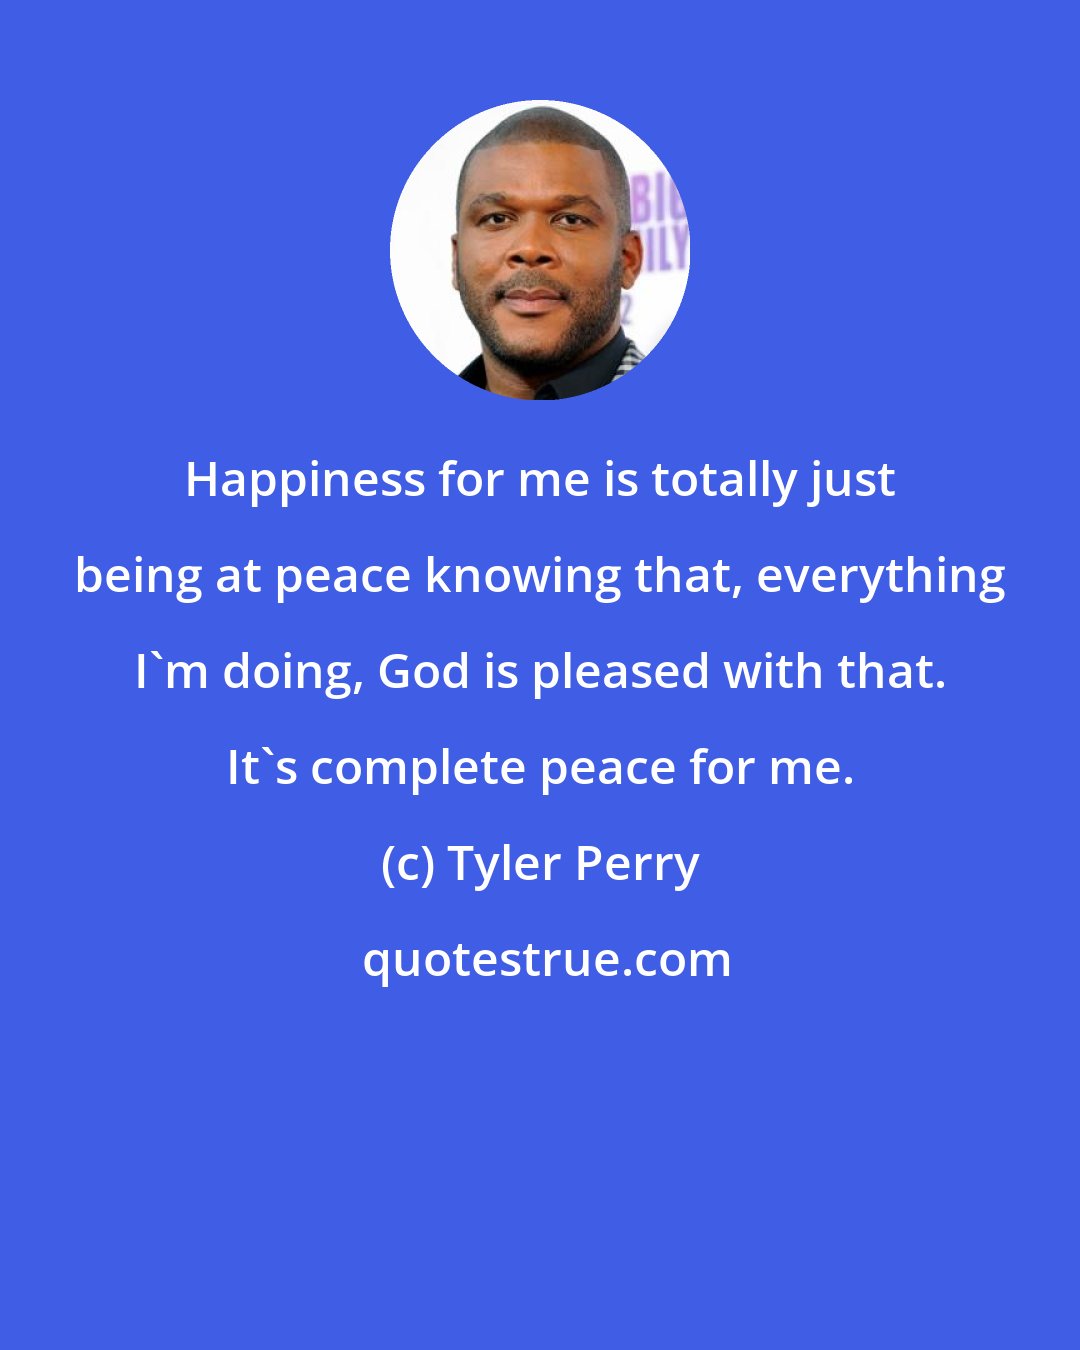 Tyler Perry: Happiness for me is totally just being at peace knowing that, everything I'm doing, God is pleased with that. It's complete peace for me.